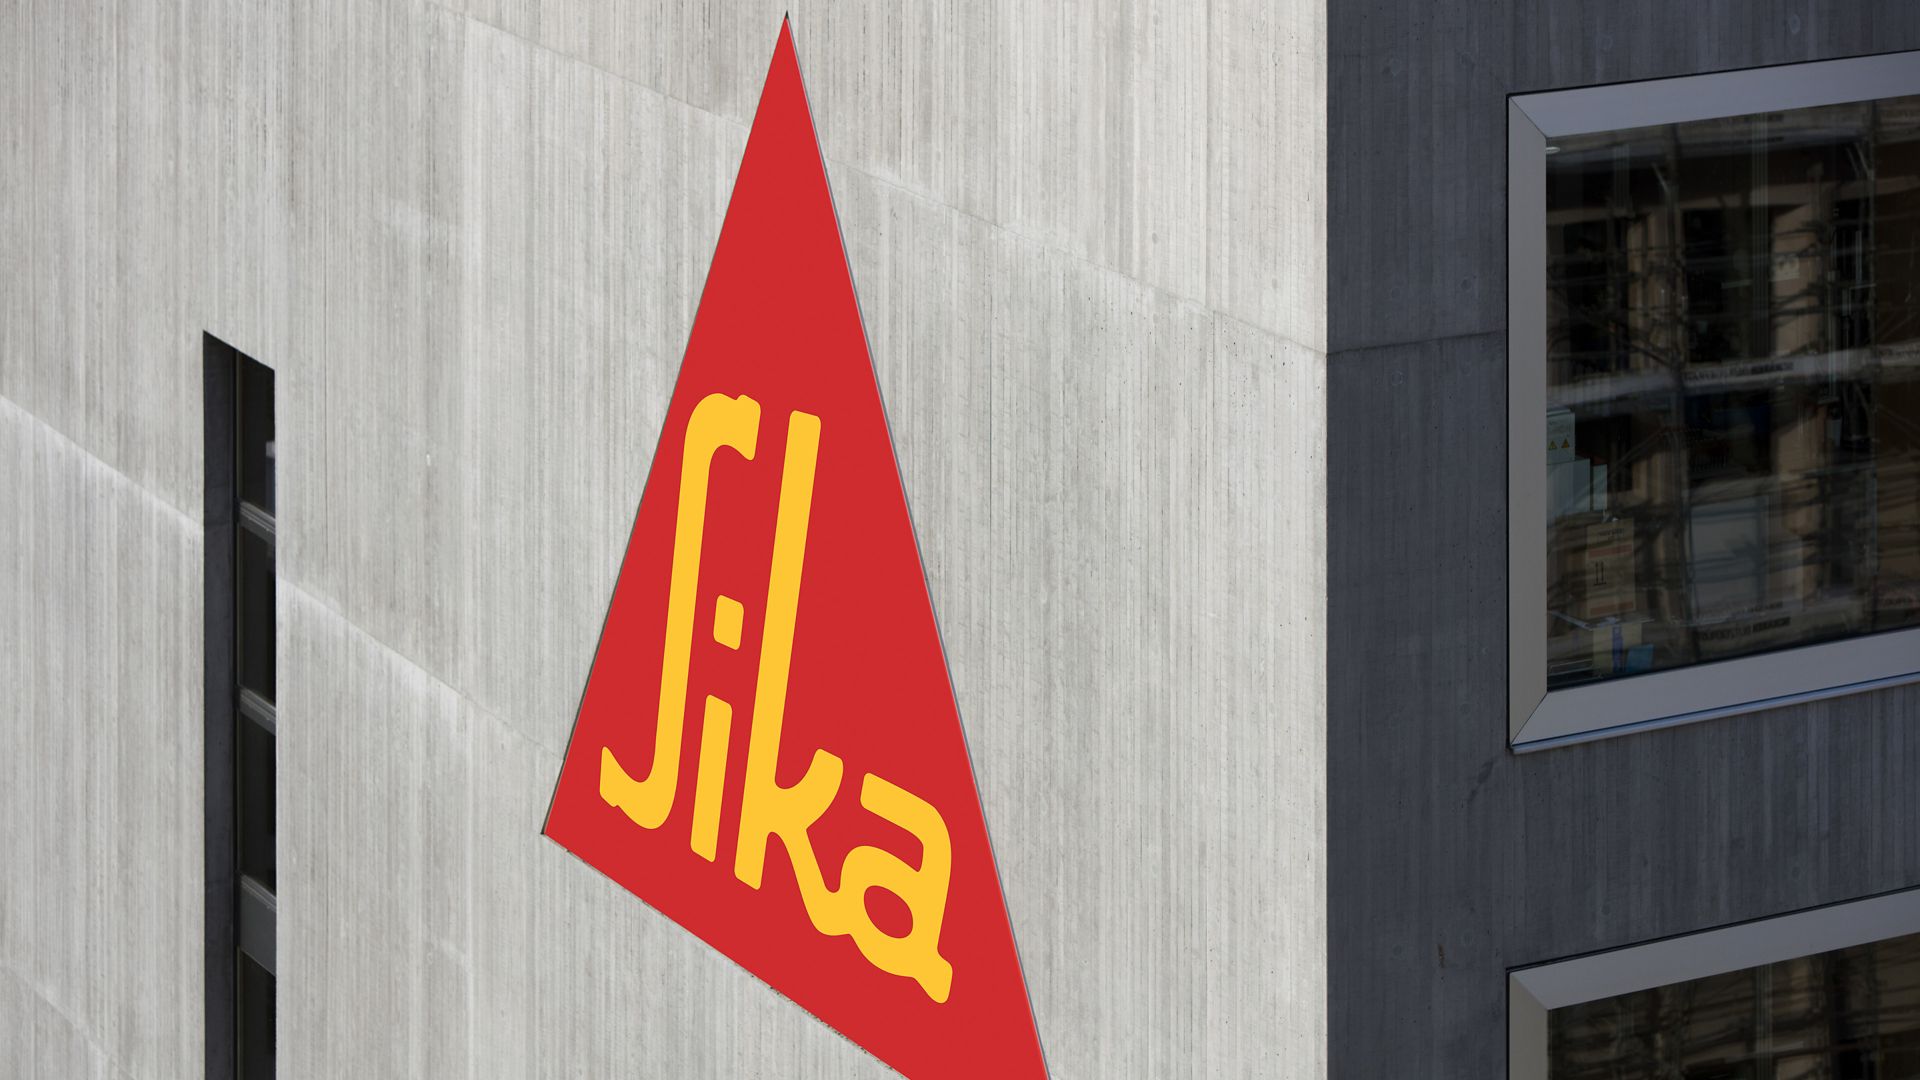 https://sika.scene7.com/is/image/sika/glo-sika-logo-offices-zurich:16-9?wid=1920&hei=1080&fit=crop%2C1